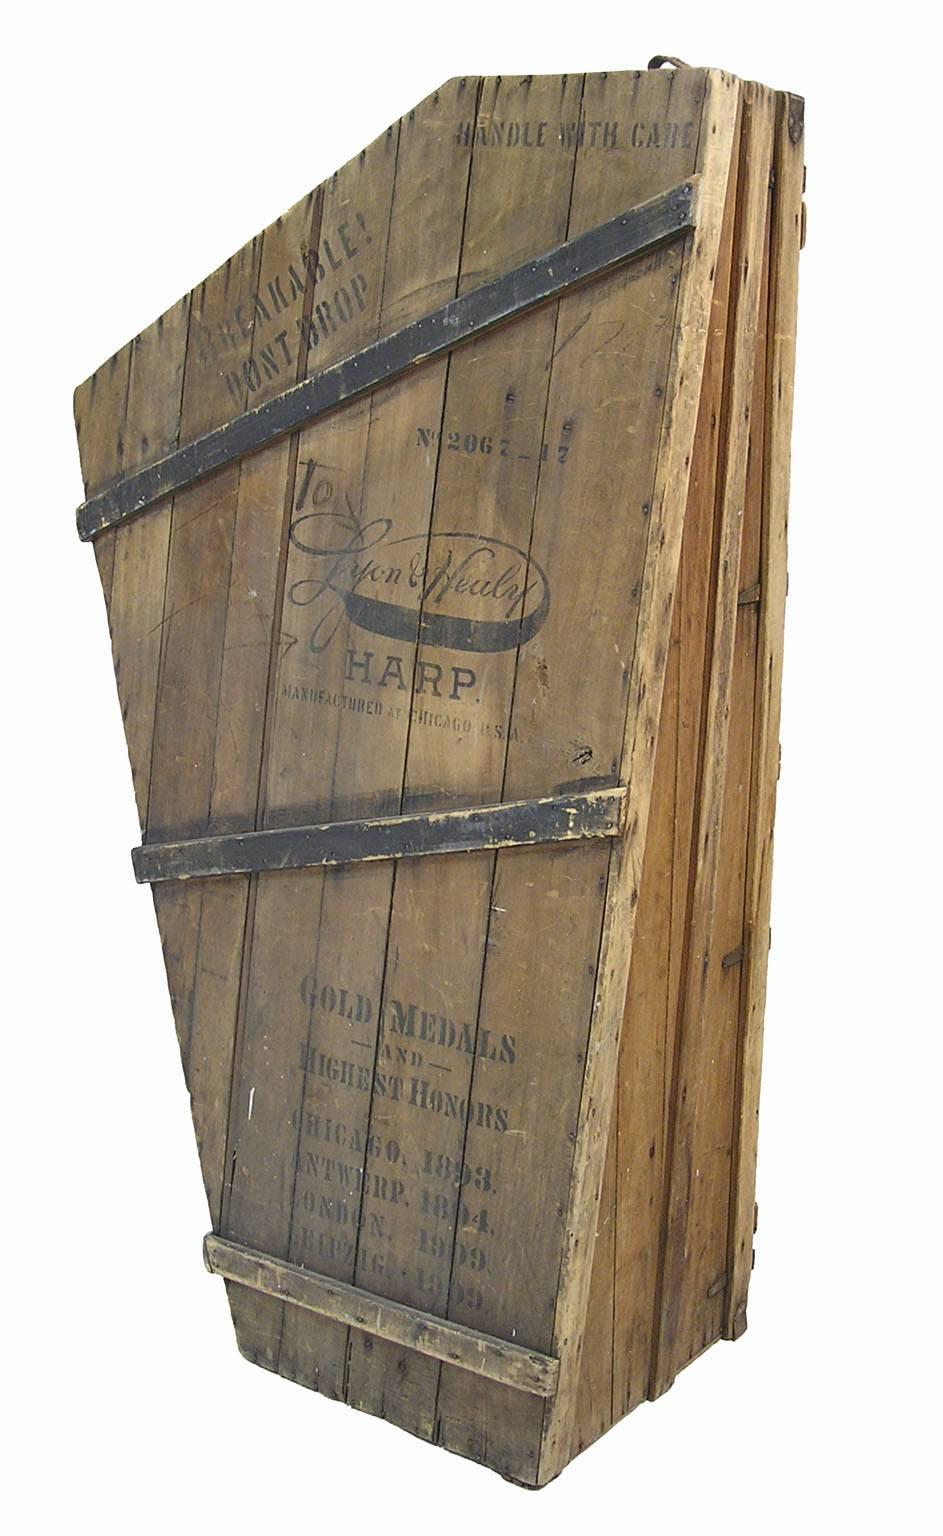 1920s Lyon and Healy Harp Crate Storage Unit In Good Condition For Sale In Winnipeg, Manitoba